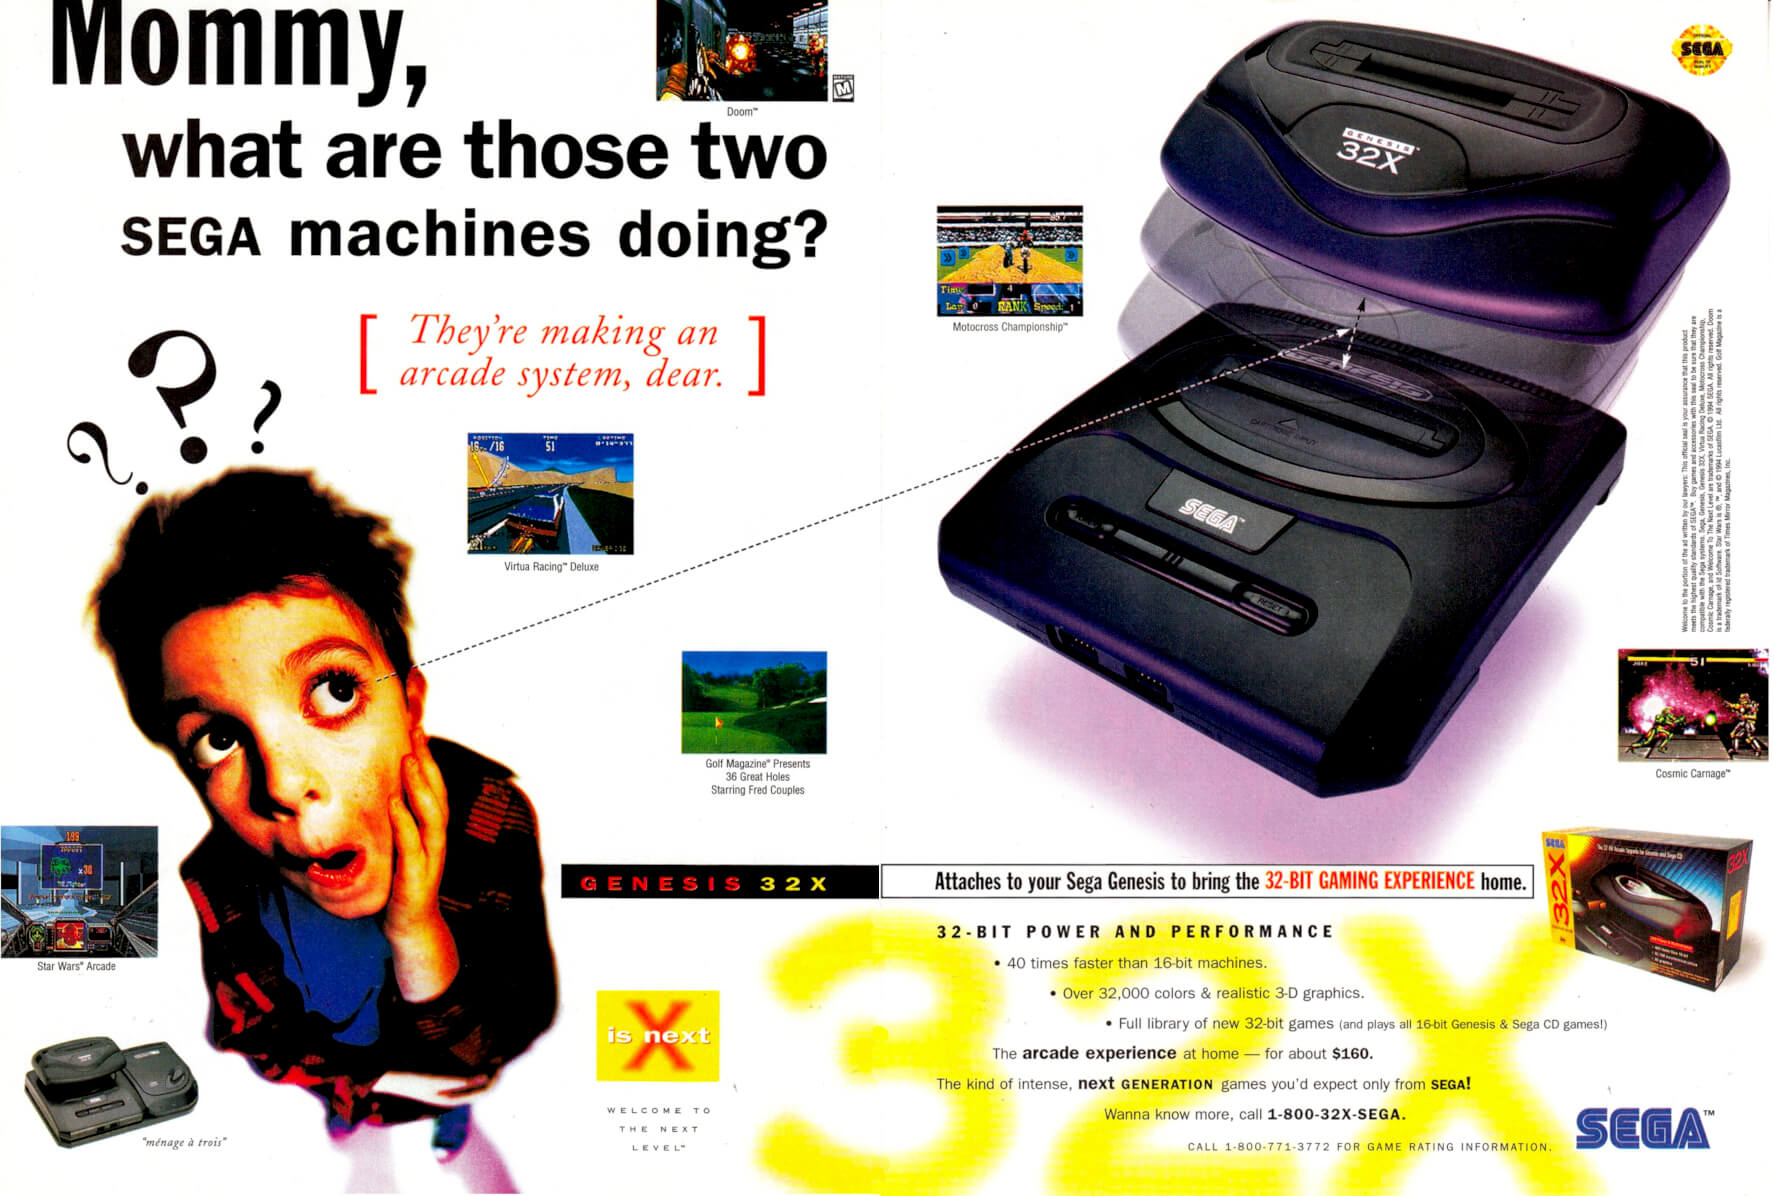 Image For Post | The 32X is an add-on for the Sega Genesis video game console. Codenamed "Project Mars", the 32X was designed to expand the power of the Genesis and serve as a transitional console into the 32-bit era until the release of the Sega Saturn. Independent of the Genesis, the 32X uses its own ROM cartridges and has its own library of games. The add-on was distributed under the name Super 32X[a] in Japan, Genesis 32X in North America, Mega Drive 32X in the PAL region, and Mega 32X in Brazil.

Unveiled by Sega at June 1994's Consumer Electronics Show, the 32X was presented as a low-cost option for consumers looking to play 32-bit games. Developed in response to the Atari Jaguar and concerns that the Saturn would not make it to market by the end of 1994, the product was conceived as an entirely new console. 

Before the 32X could be launched, the release date of the Saturn was announced for November 1994 in Japan, coinciding with the 32X's target launch date in North America. Sega of America now was faced with trying to market the 32X with the Saturn's Japan release occurring simultaneously. Their answer was to call the 32X a "transitional device" between the Genesis and the Saturn, to which Bayless describes of the strategy, "[f]rankly, it just made us look greedy and dumb to consumers."[3]

The 32X is considered a commercial failure. Reception after the add-on's unveiling and launch was positive, highlighting the low price of the system and power expansion to the Genesis. Later reviews, both contemporary and retrospective, for the 32X have been mostly negative because of its shallow game library, poor market timing and the resulting market fragmentation for the Genesis.

Sega produced 800,000 units of the 32X and managed to sell an estimated 665,000 by the end of 1994, selling the rest at steep discounts until it was discontinued in 1996 as Sega turned its focus to the Saturn.